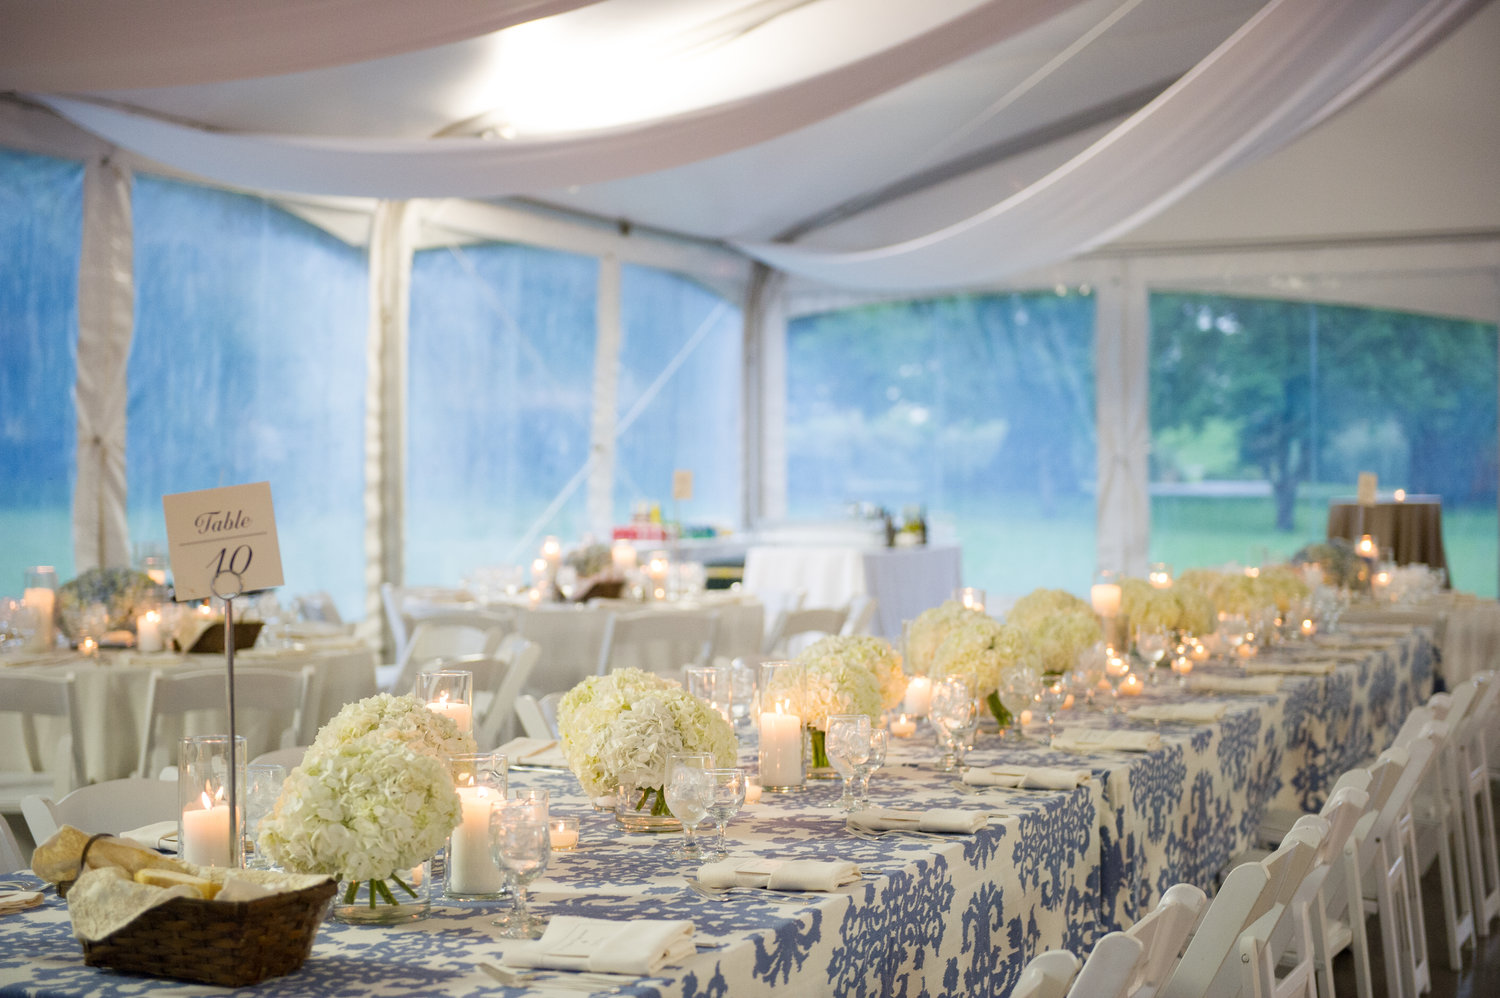 White and blue table linens with white hydrangeas lining the table with tea lights and candles